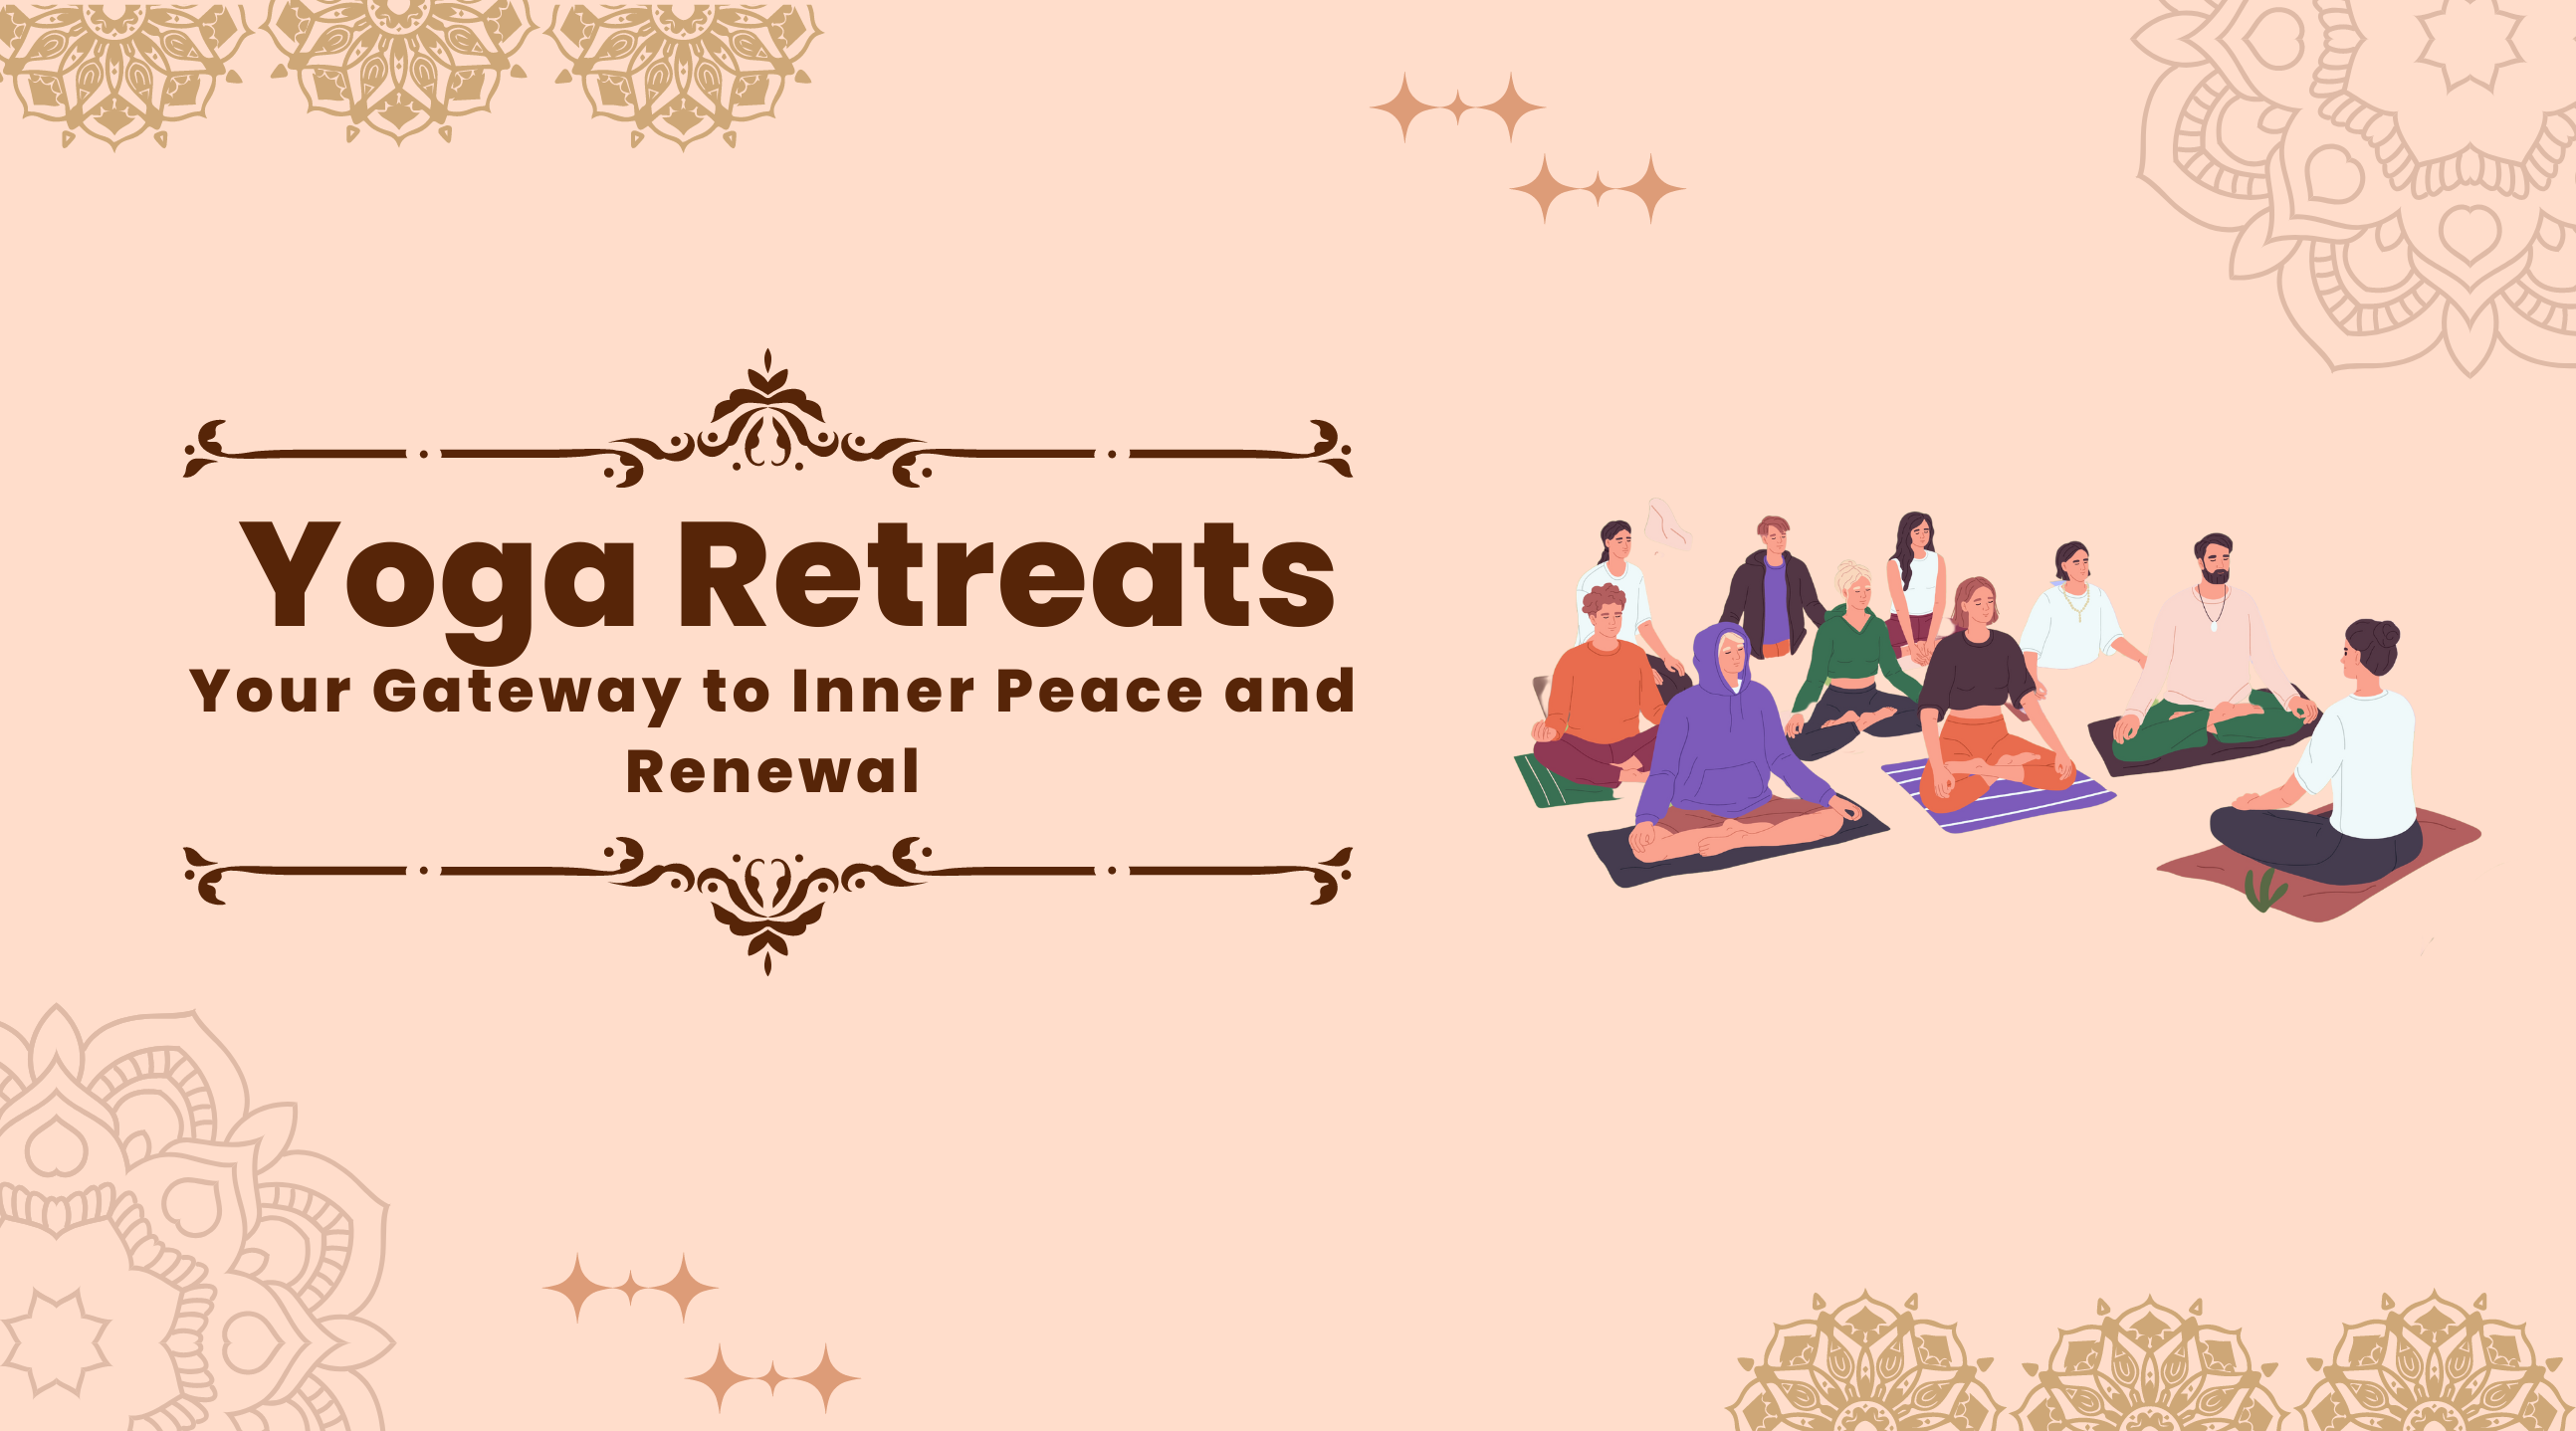 Yoga Retreats: Your Gateway to Inner Peace and Renewal